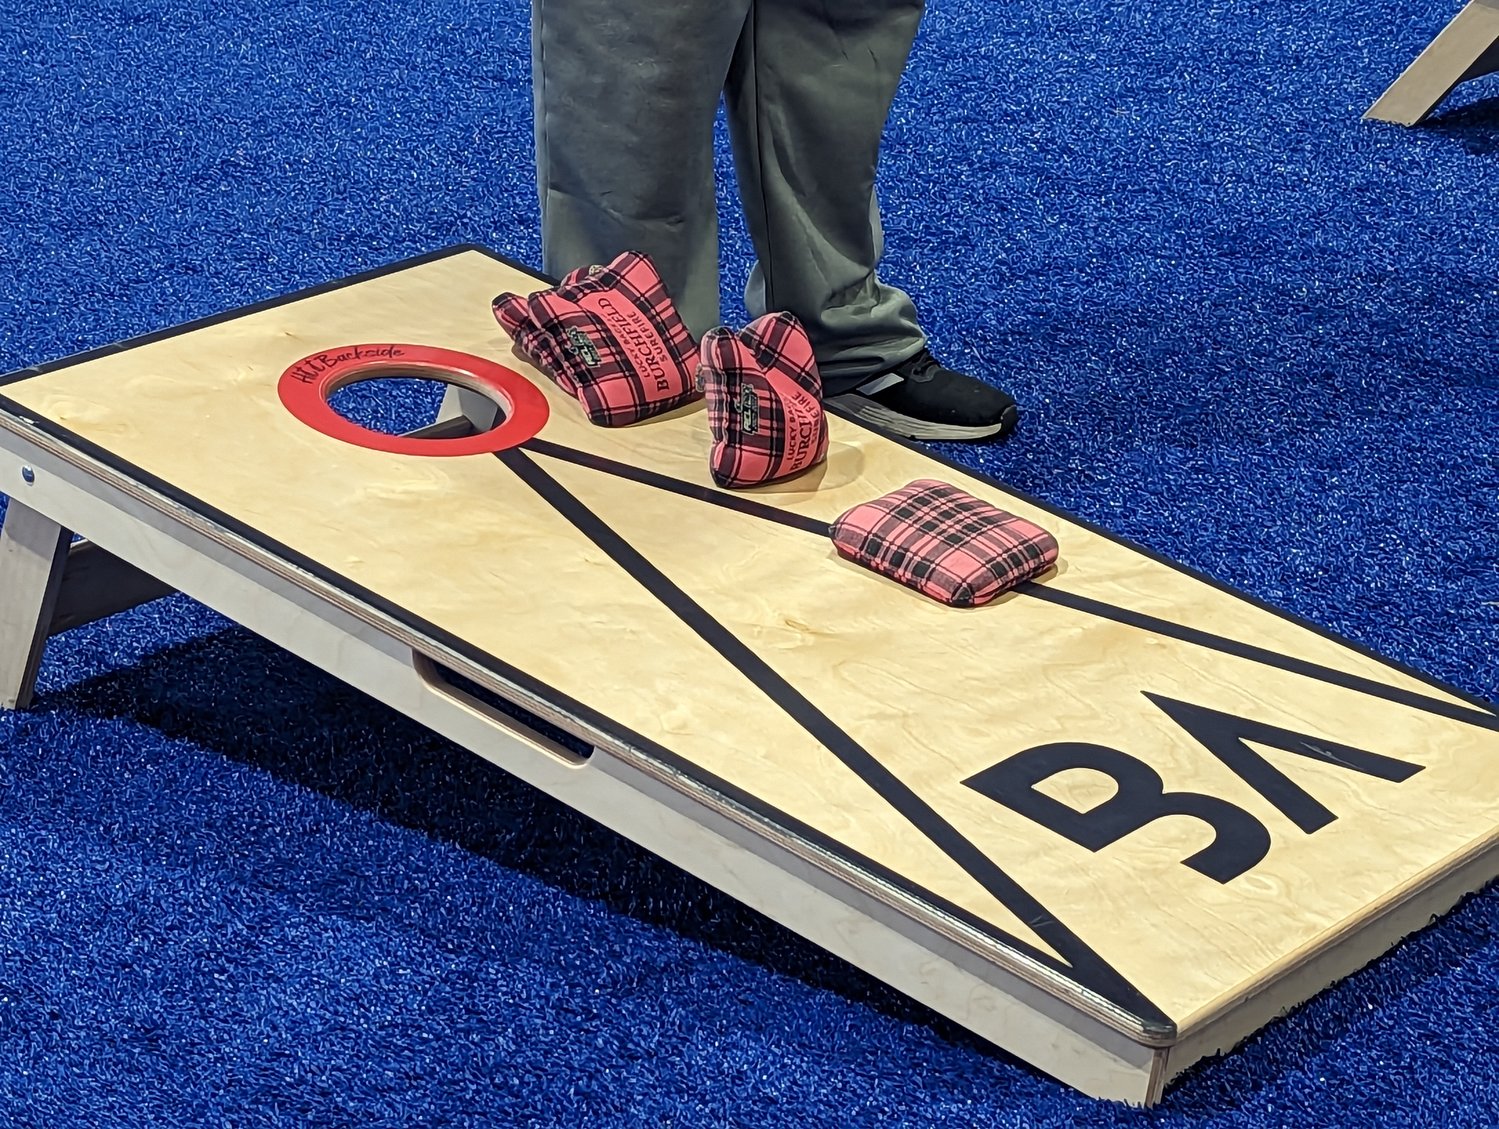 A standard cornhole board. Players attempt to toss bean bags into the hole for three points, with one point awarded for managing to stay on the sloped, slippery board.